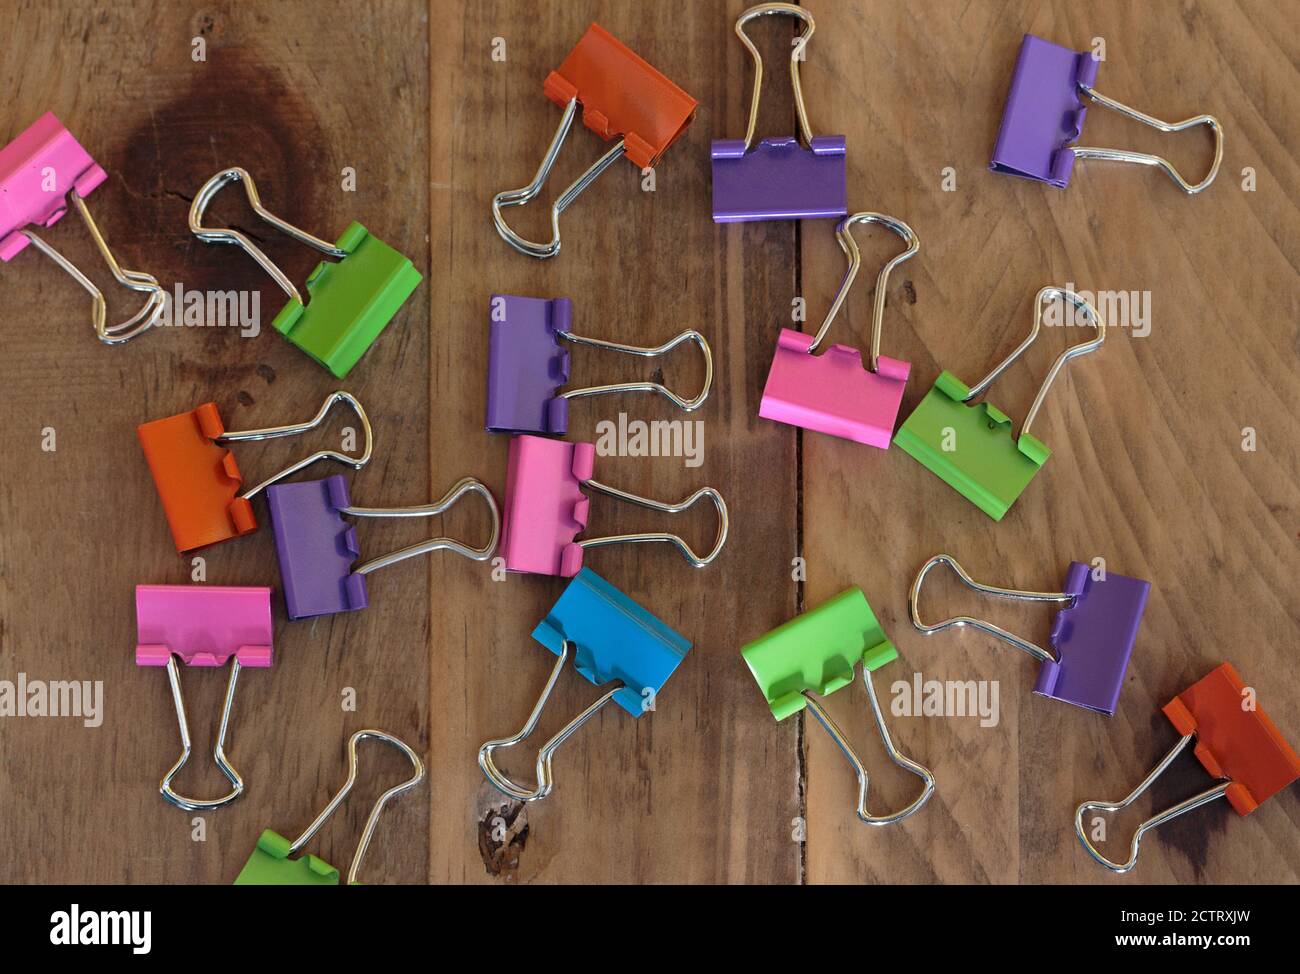 assorted binder clips in bright orange, pink, green, purple and blue colors scattered on a wood background Stock Photo